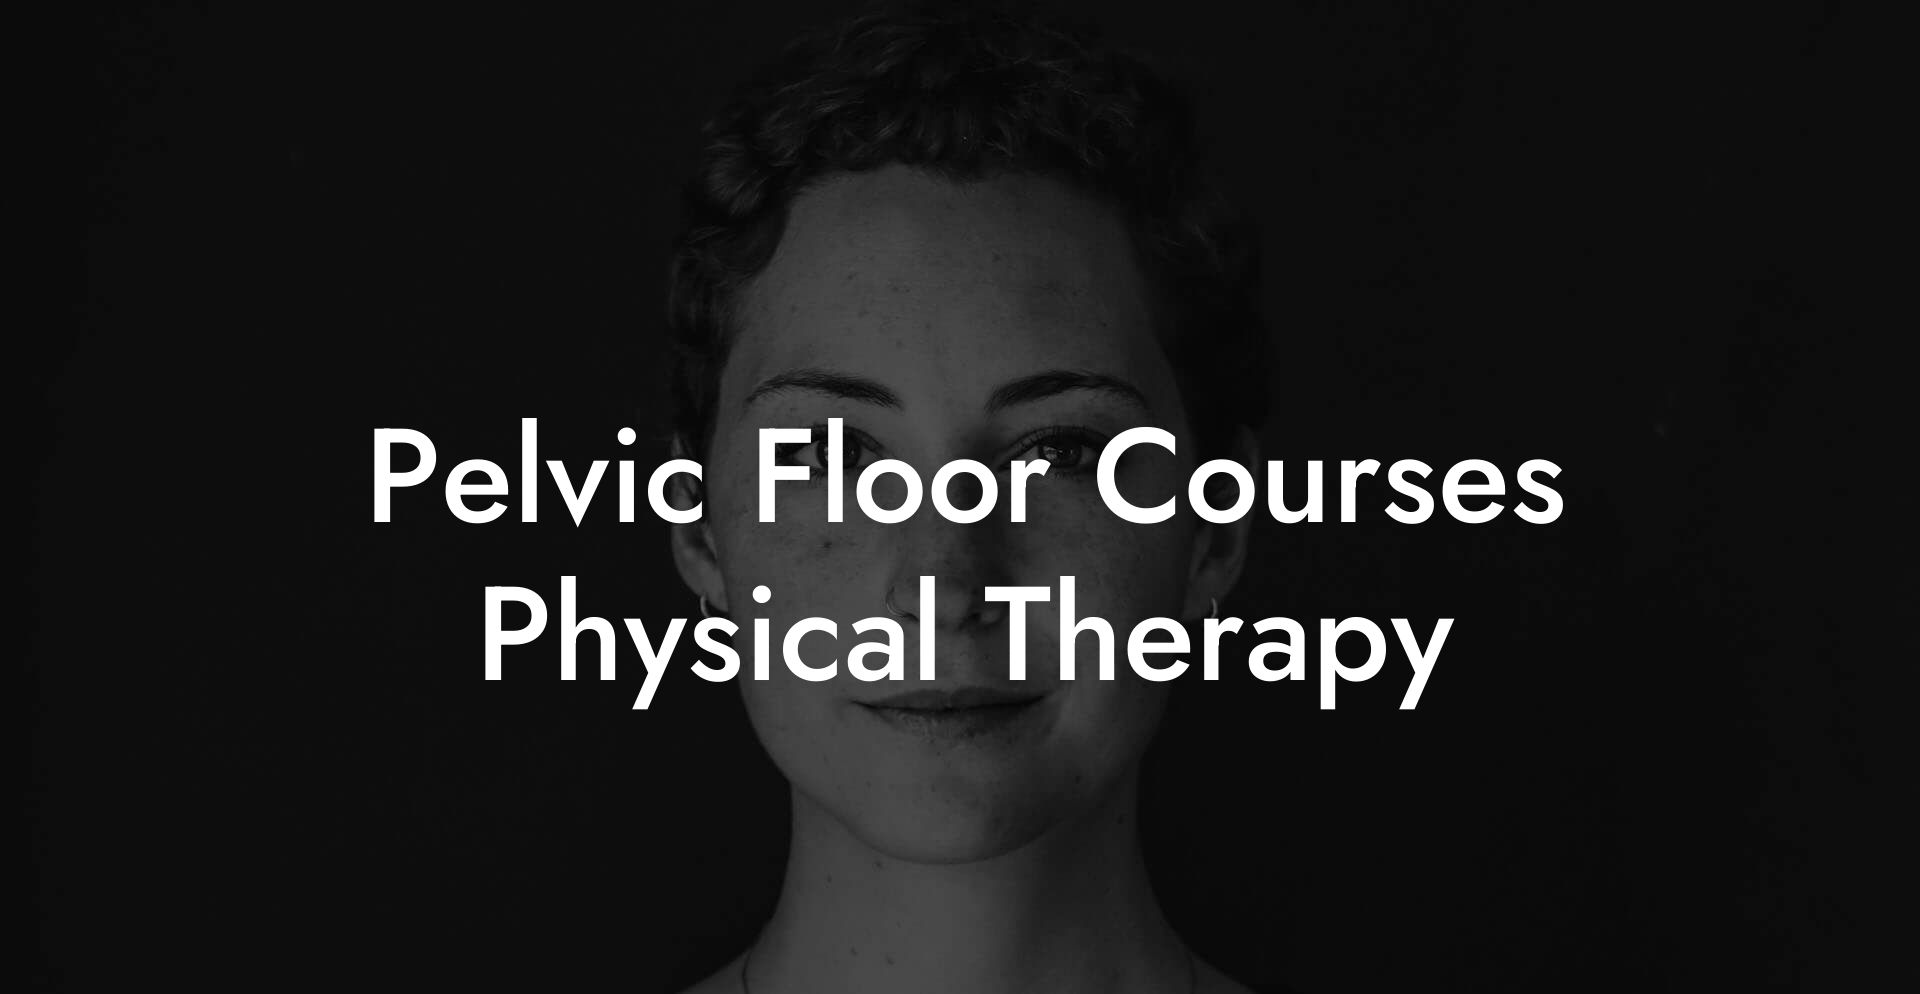 Pelvic Floor Courses Physical Therapy